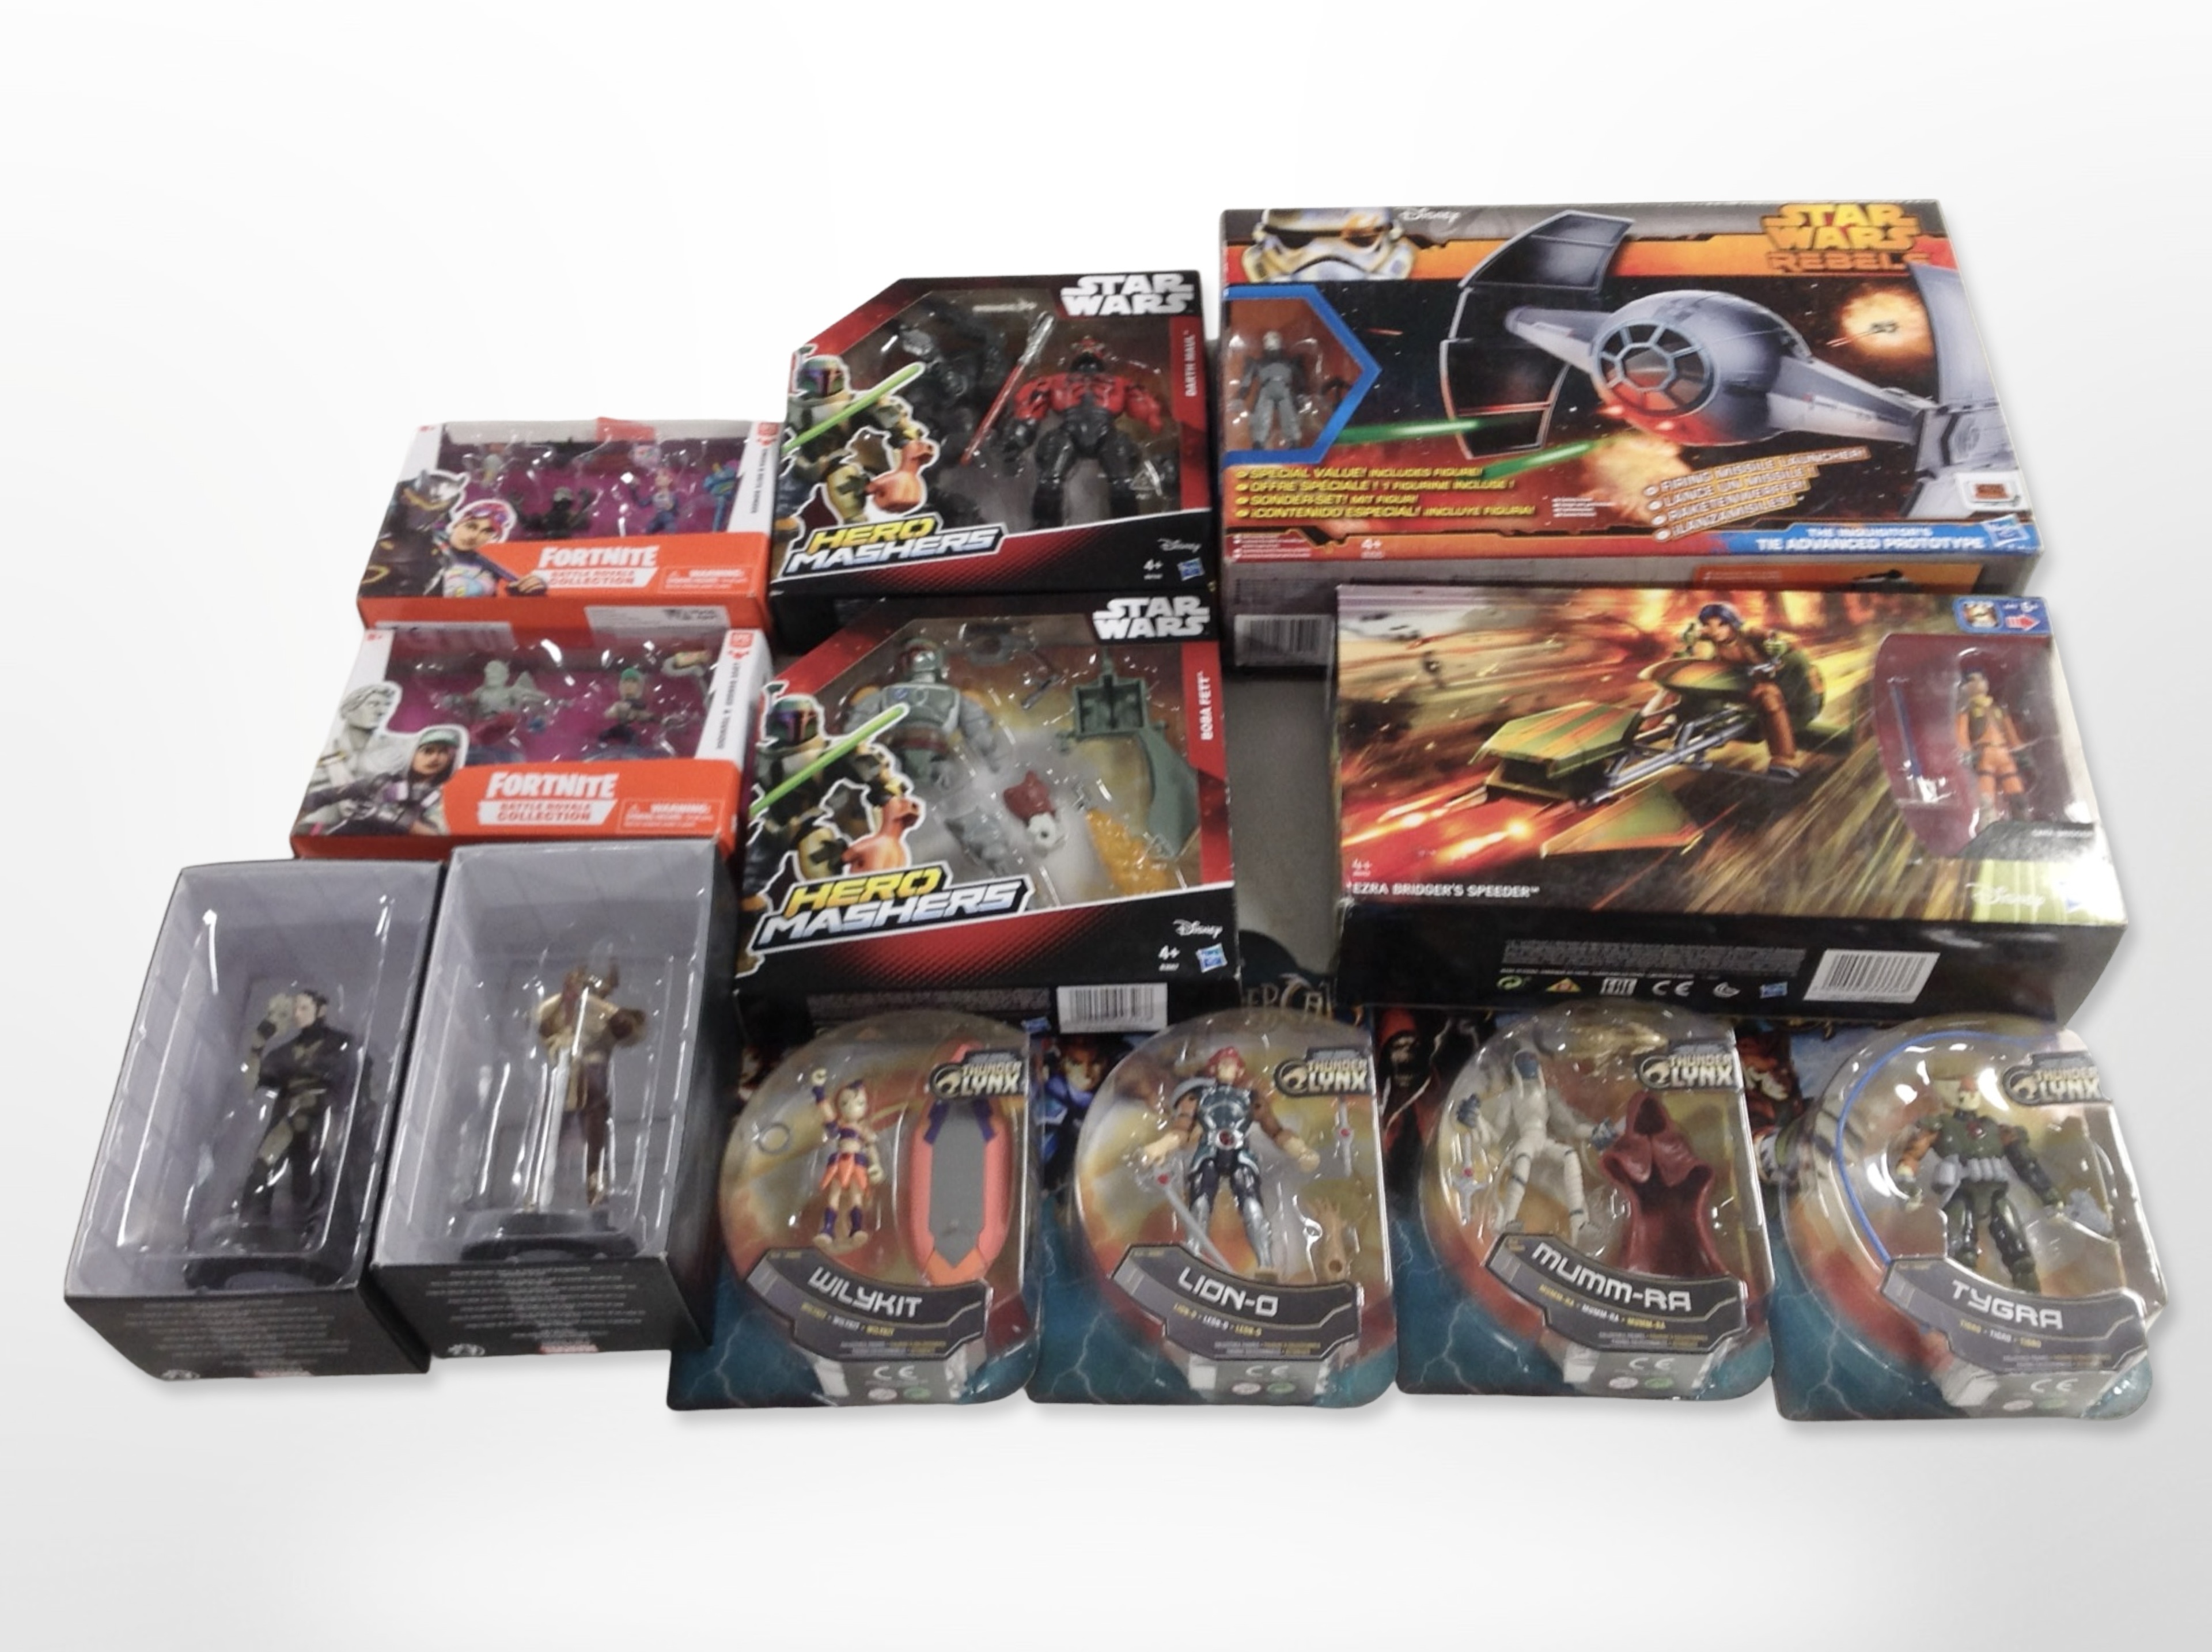 11 Bandai, Epic Games and Hasbro figurines including Star Wars, Thundercats, Fornite, etc., boxed.